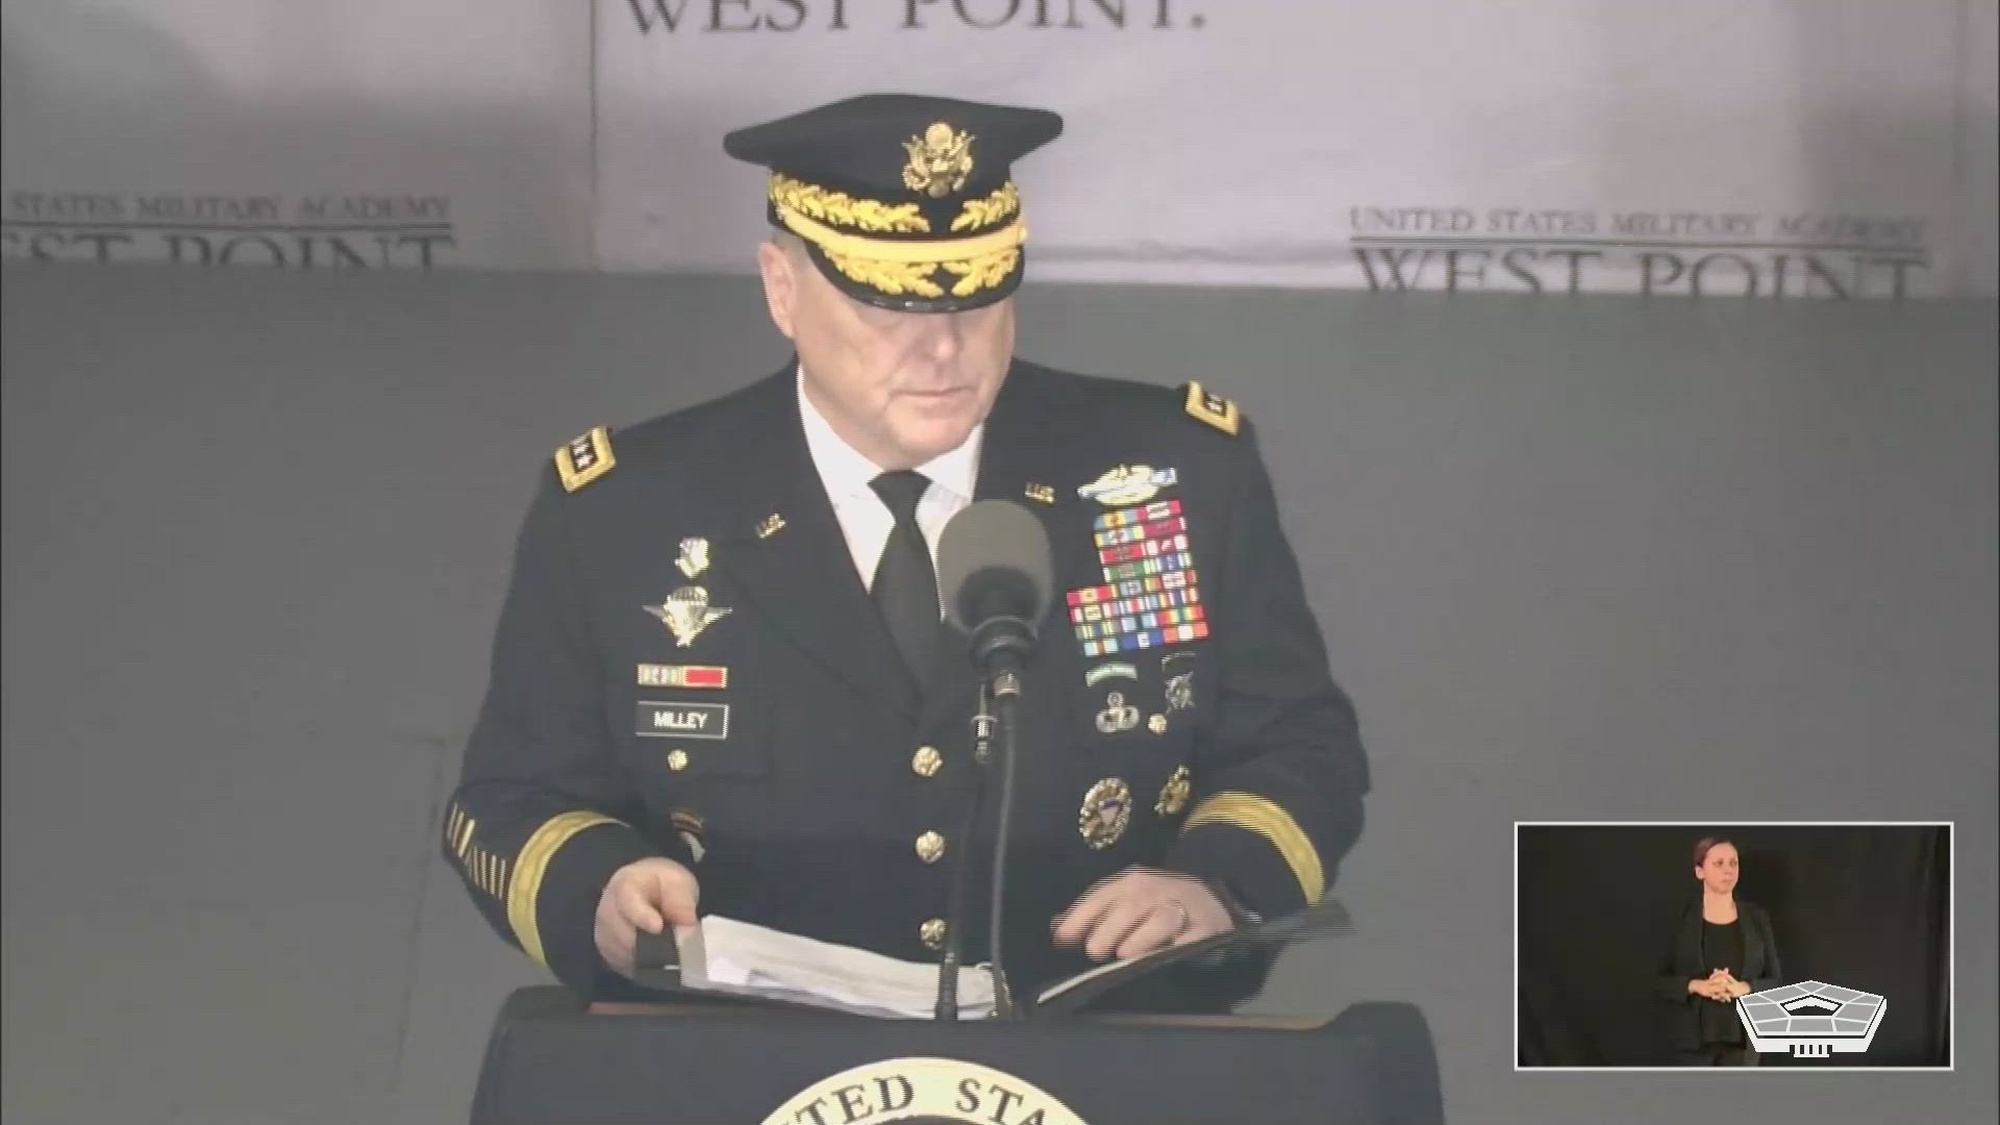 Chairman of the Joint Chiefs of Staff Army Gen. Mark A. Milley delivers the commencement speech at the U.S. Military Academy’s graduation ceremony at West Point, N.Y. 